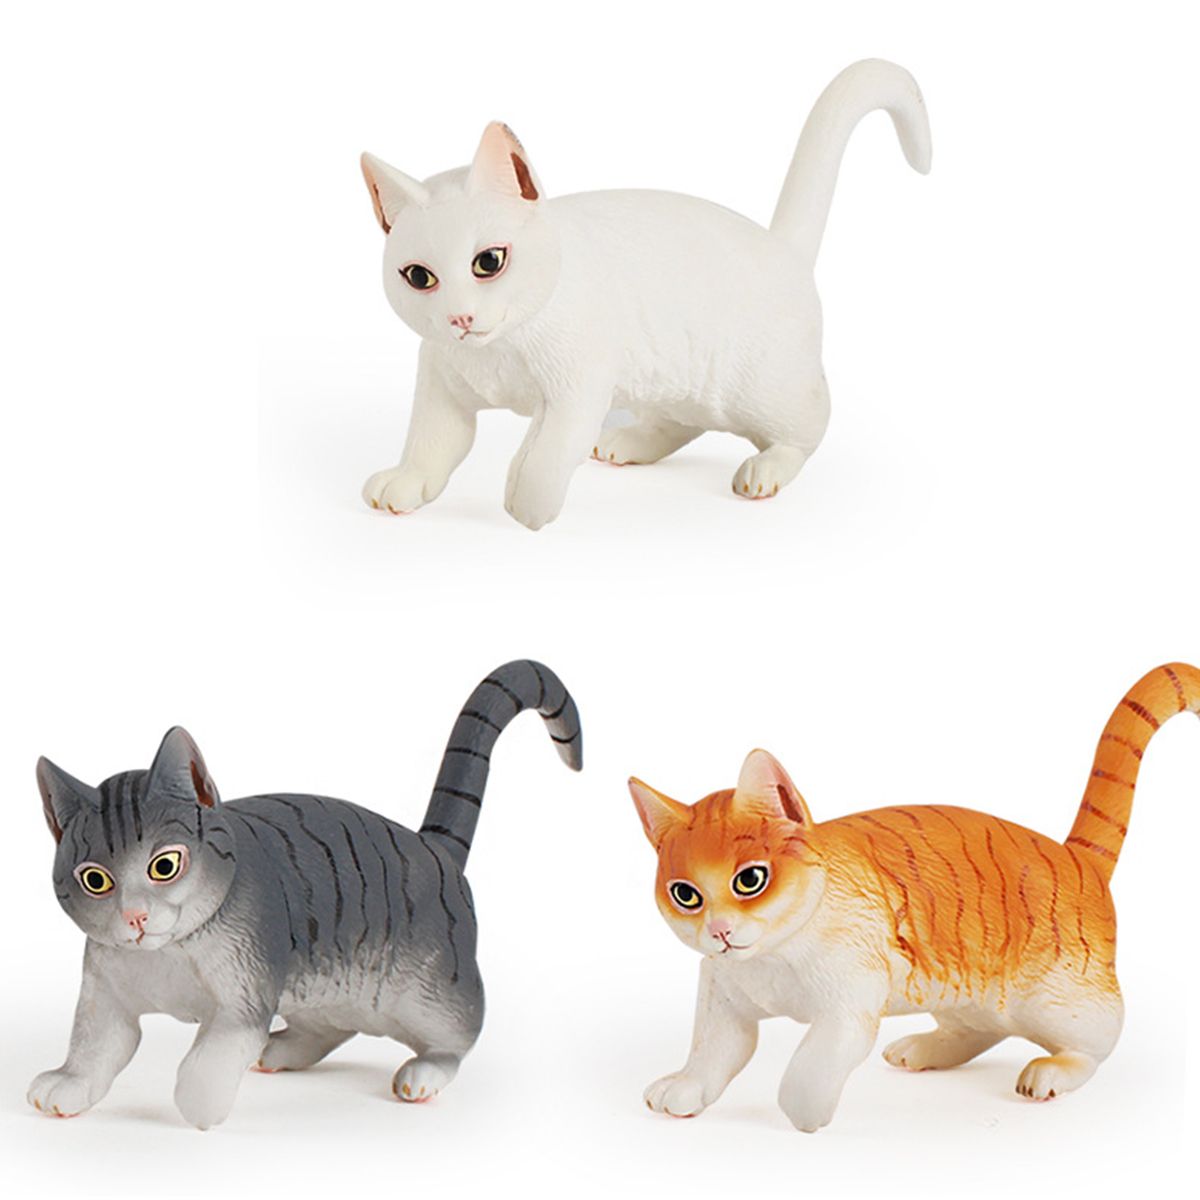 Cat-Figurine-Decorations-Simulation-Animal-Model-Kids-Toy-Statue-Solid-Persian-Pet-Home-Display-Toys-1576069